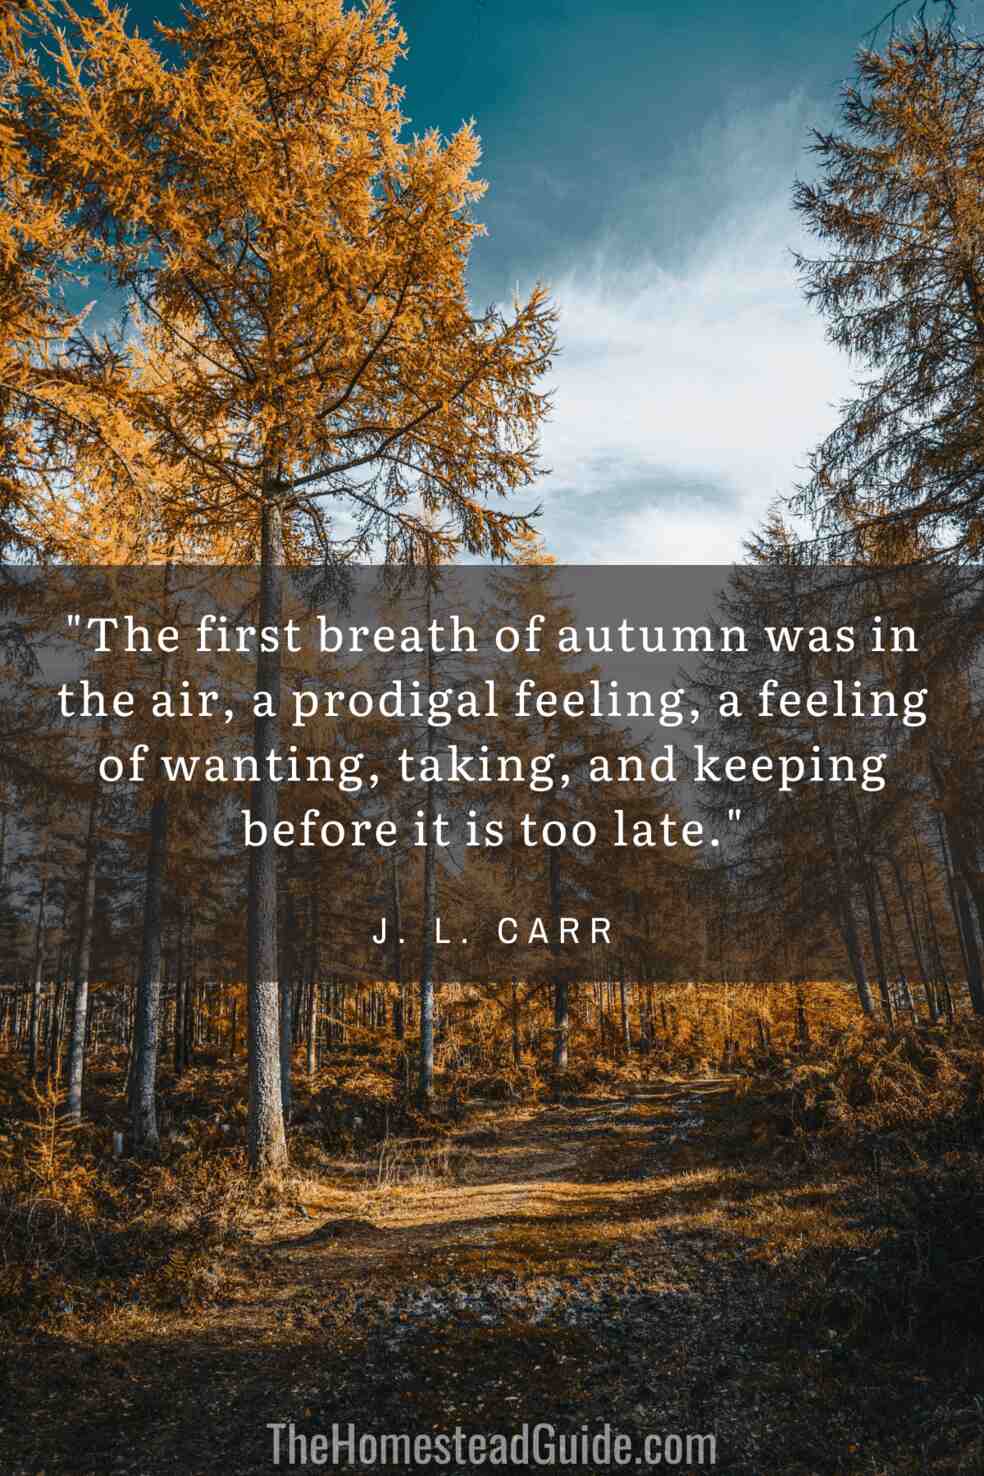 The first breath of autumn was in the air, a prodigal feeling, a feeling of wanting, taking, and keeping before it is too late.